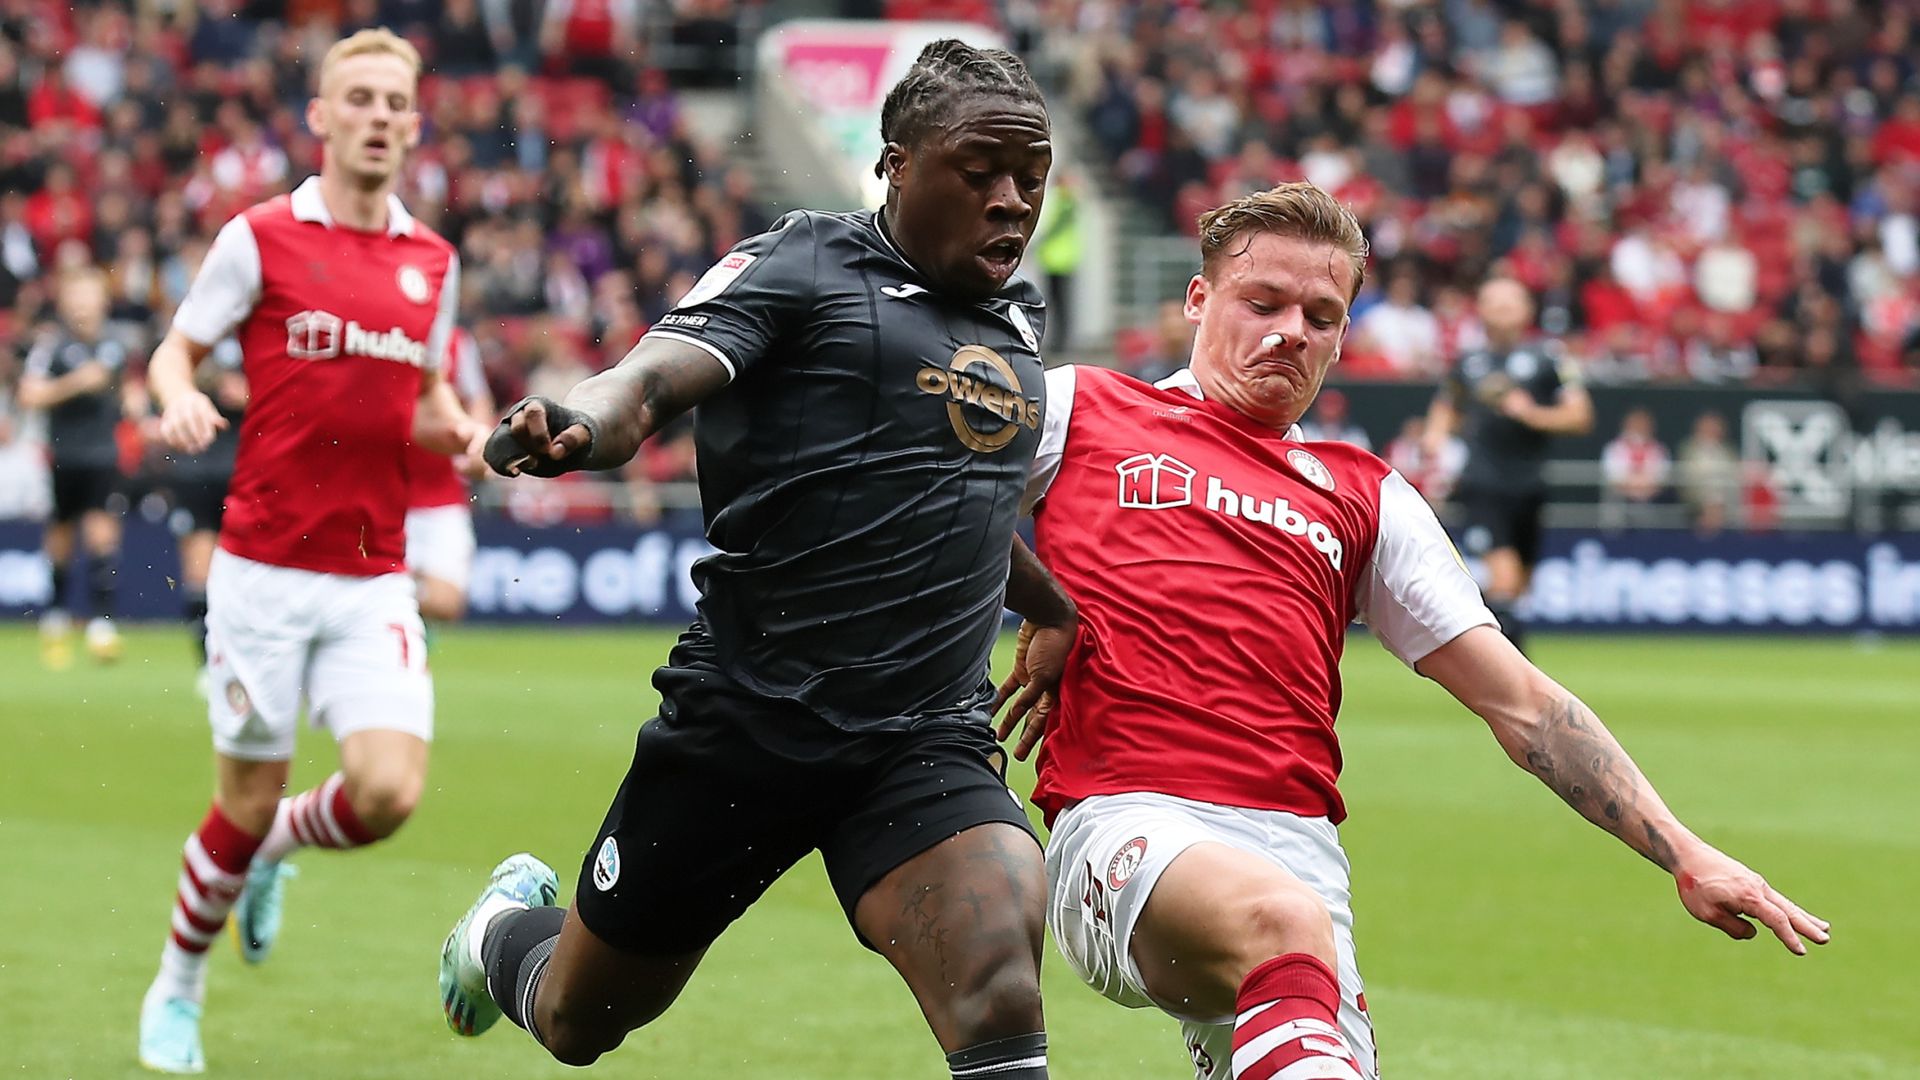 Bristol City 1-1 Swansea: Olivier Ntcham earns point for Swans